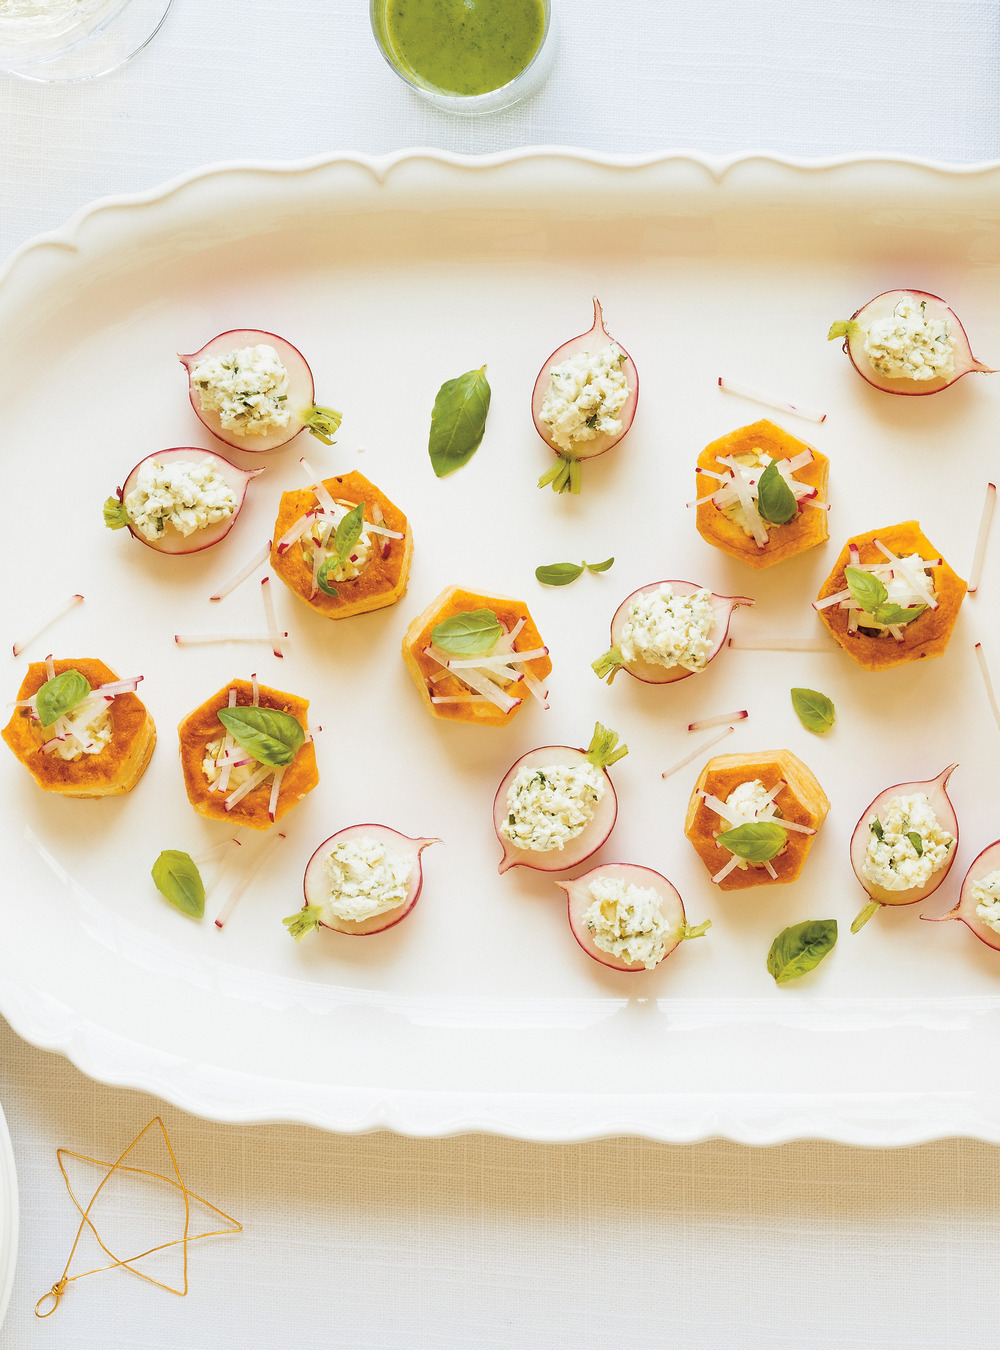 Goat Cheese and Radish Pastry Hors d’oeuvres